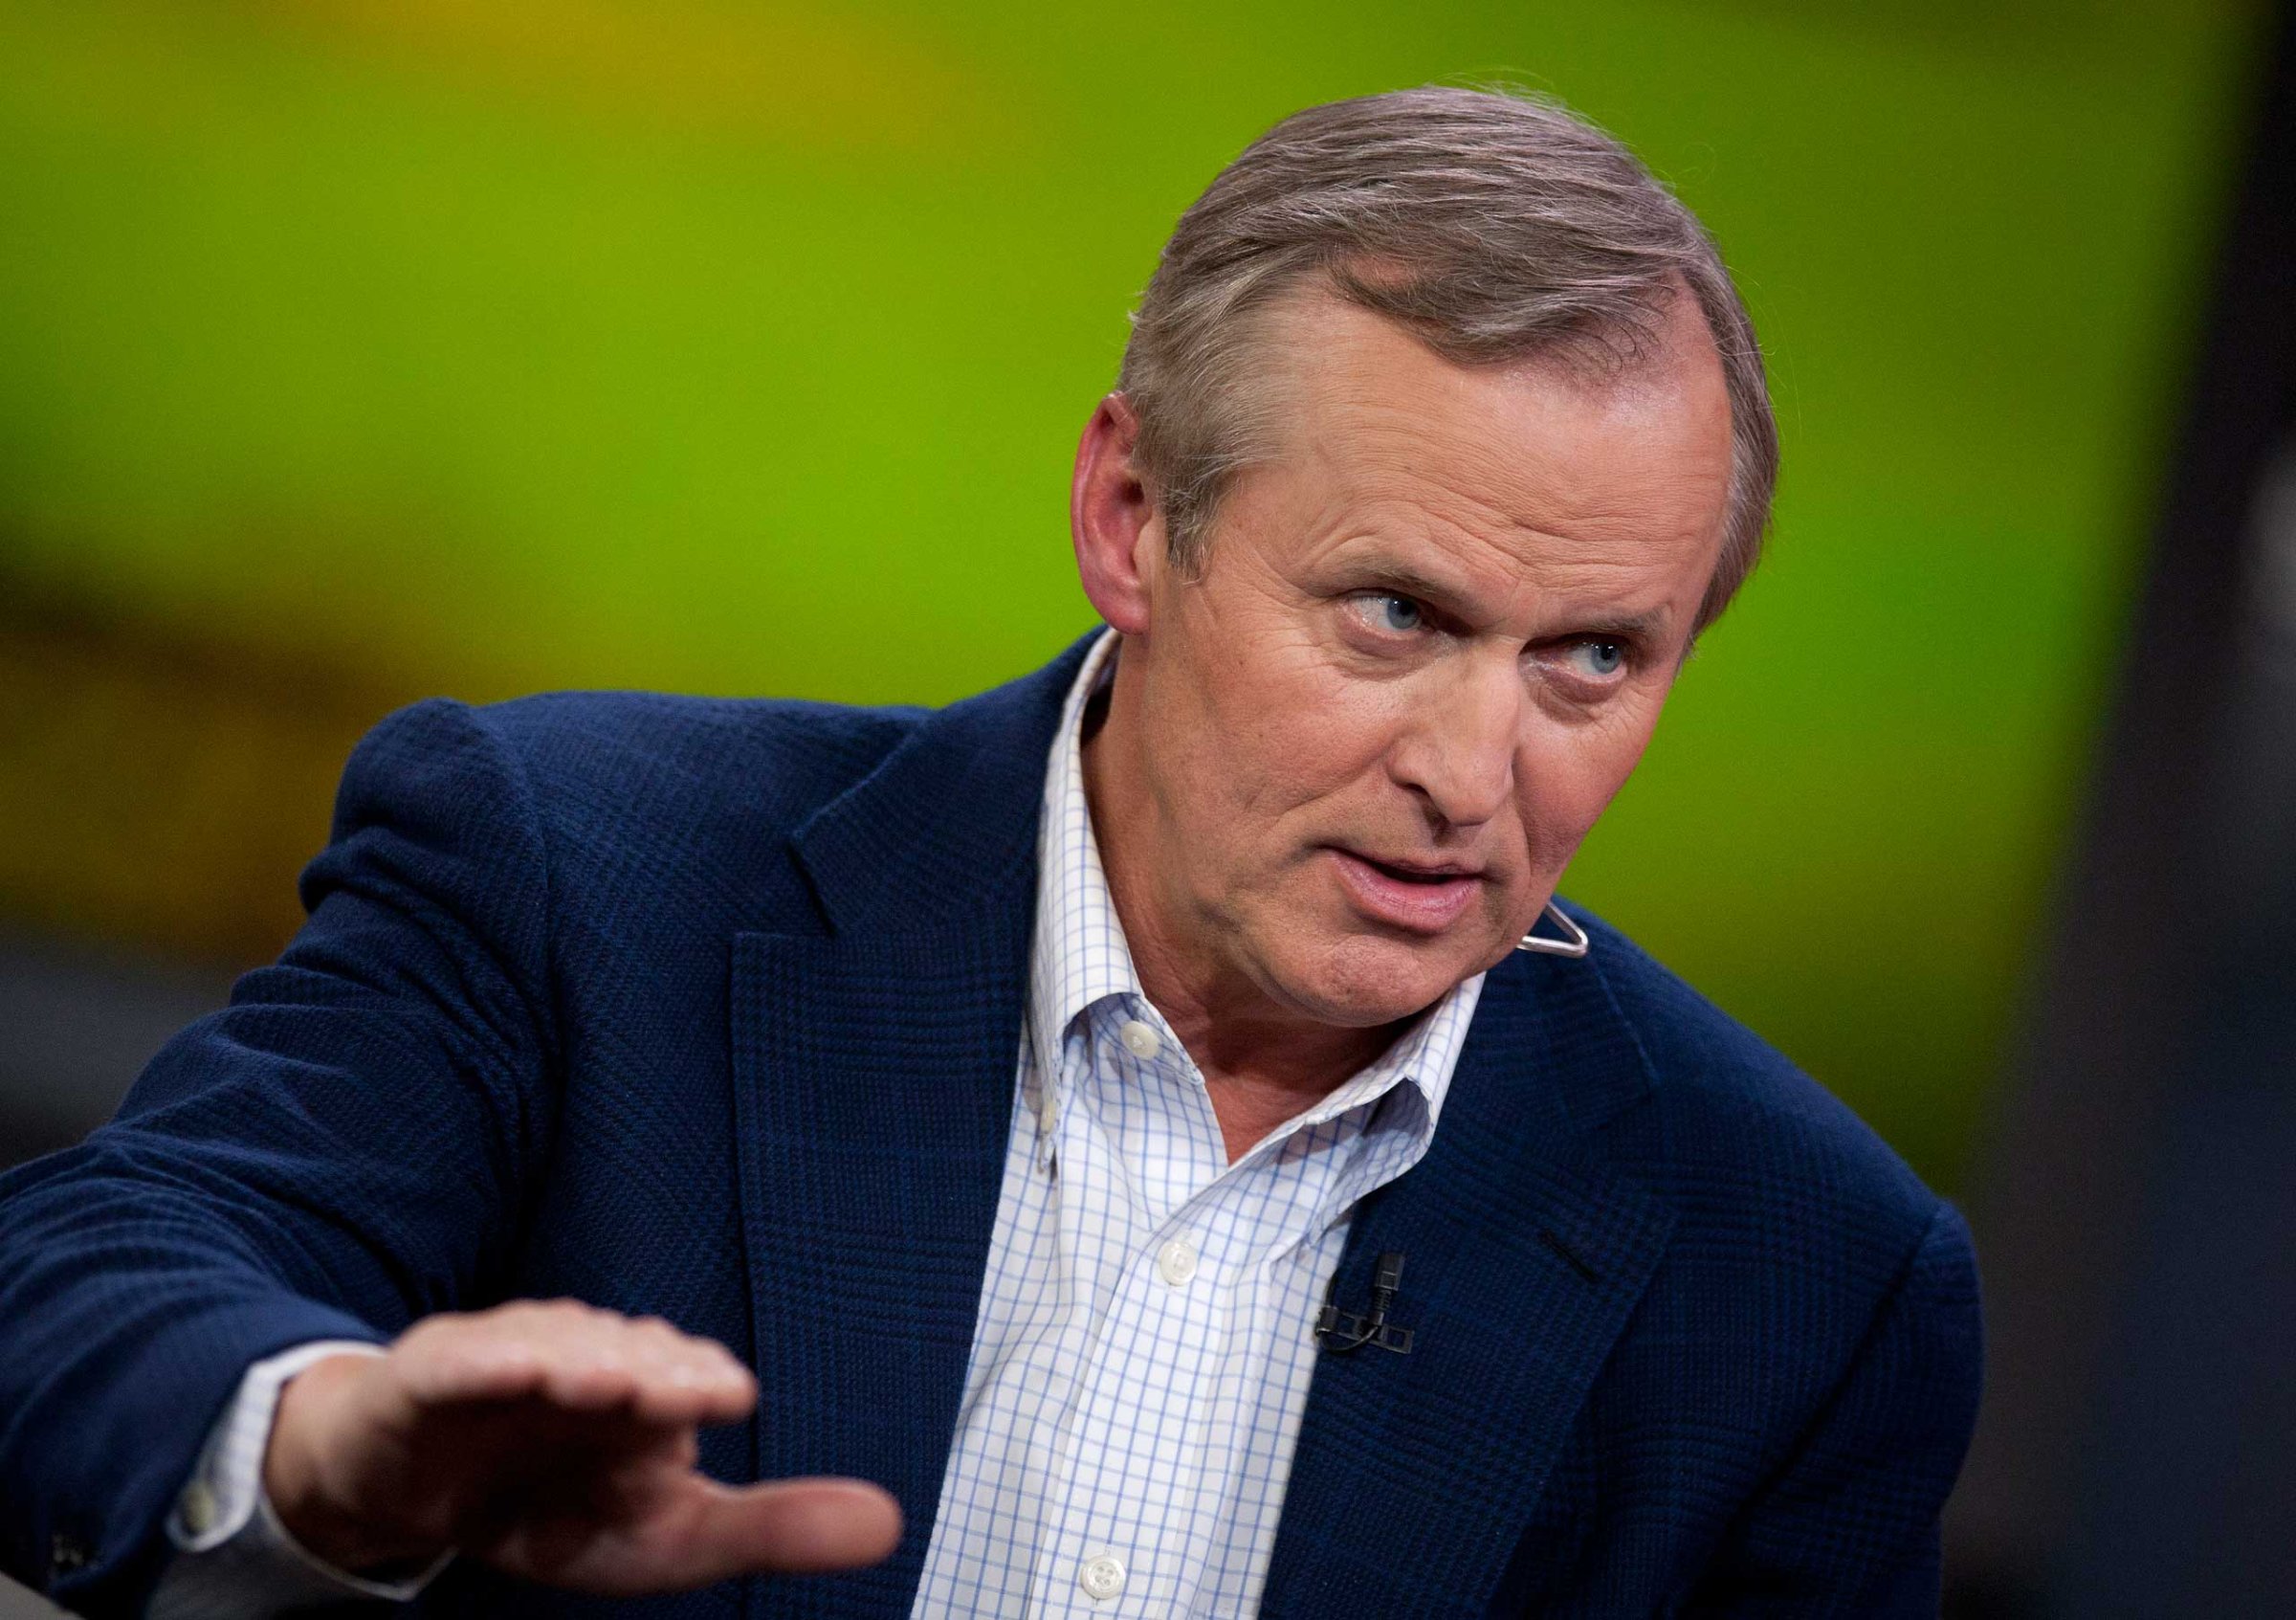 John Grisham speaks during a television interview in New York in 2012.